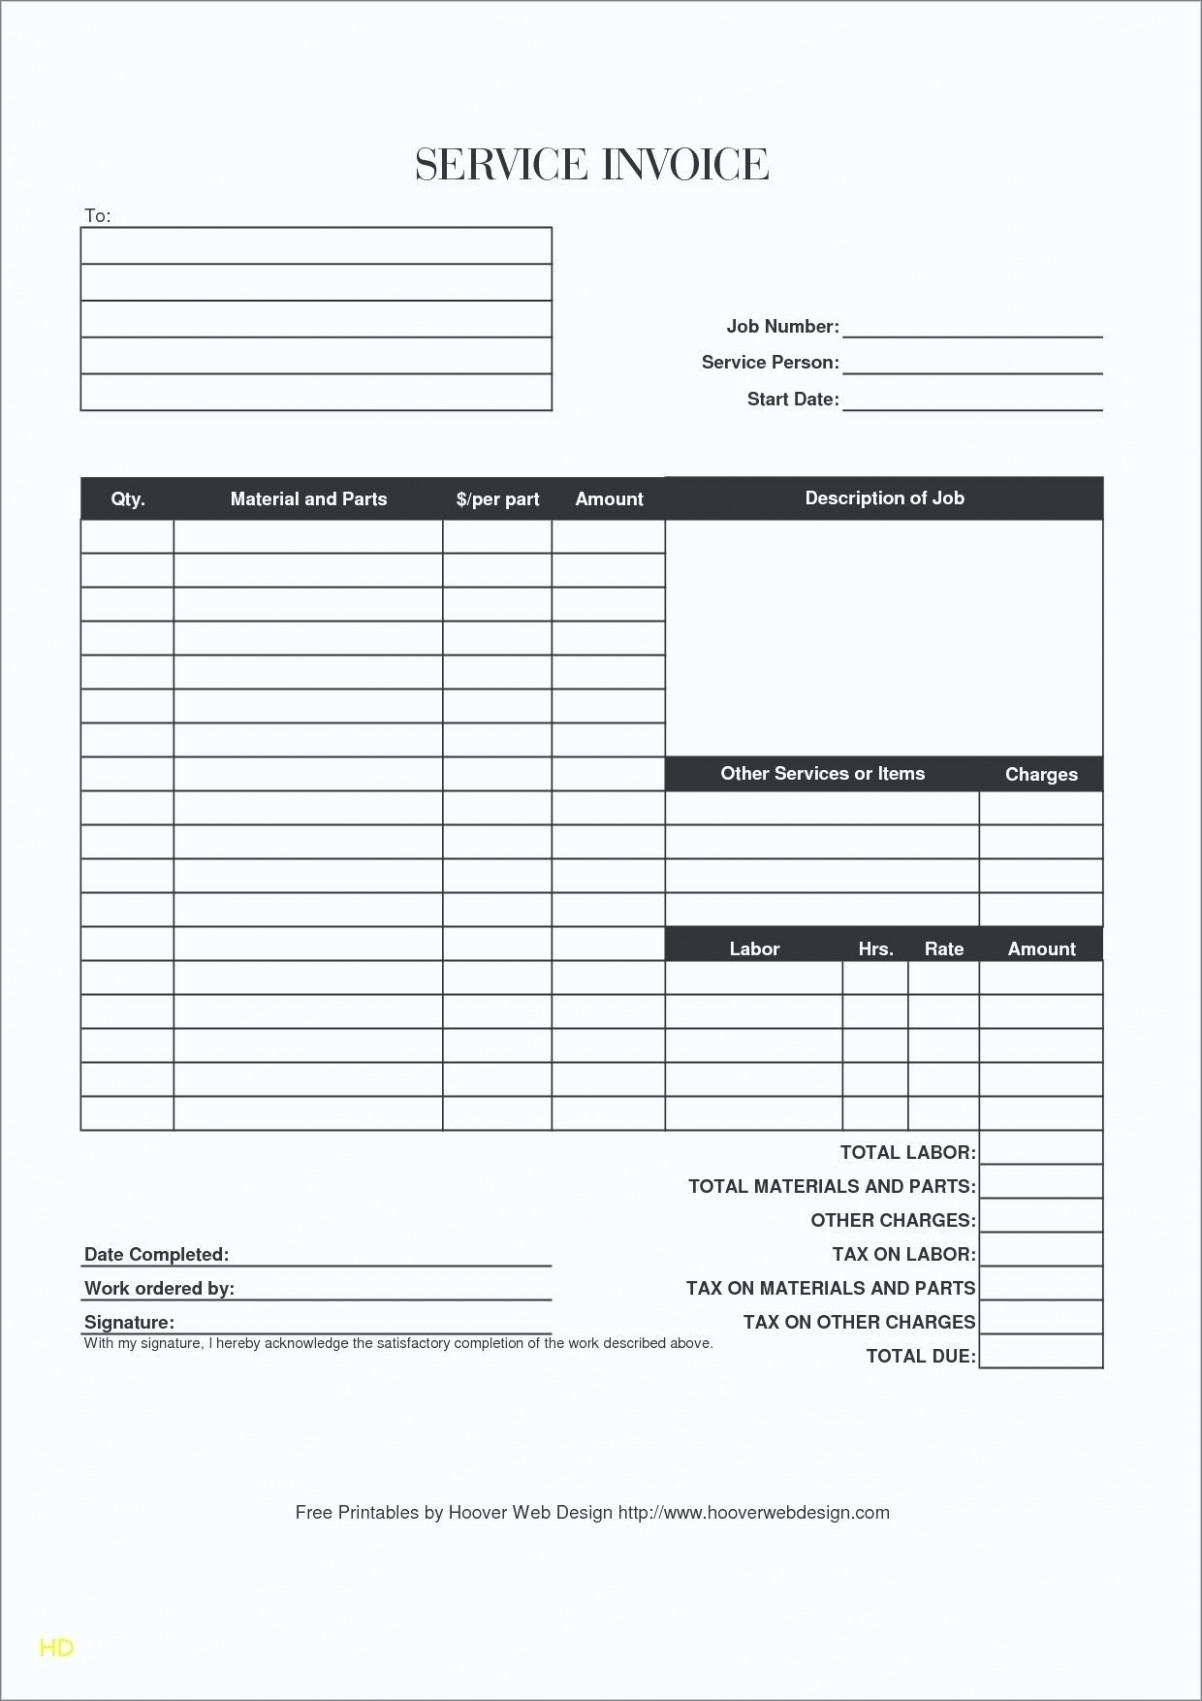 musician-invoice-template-word